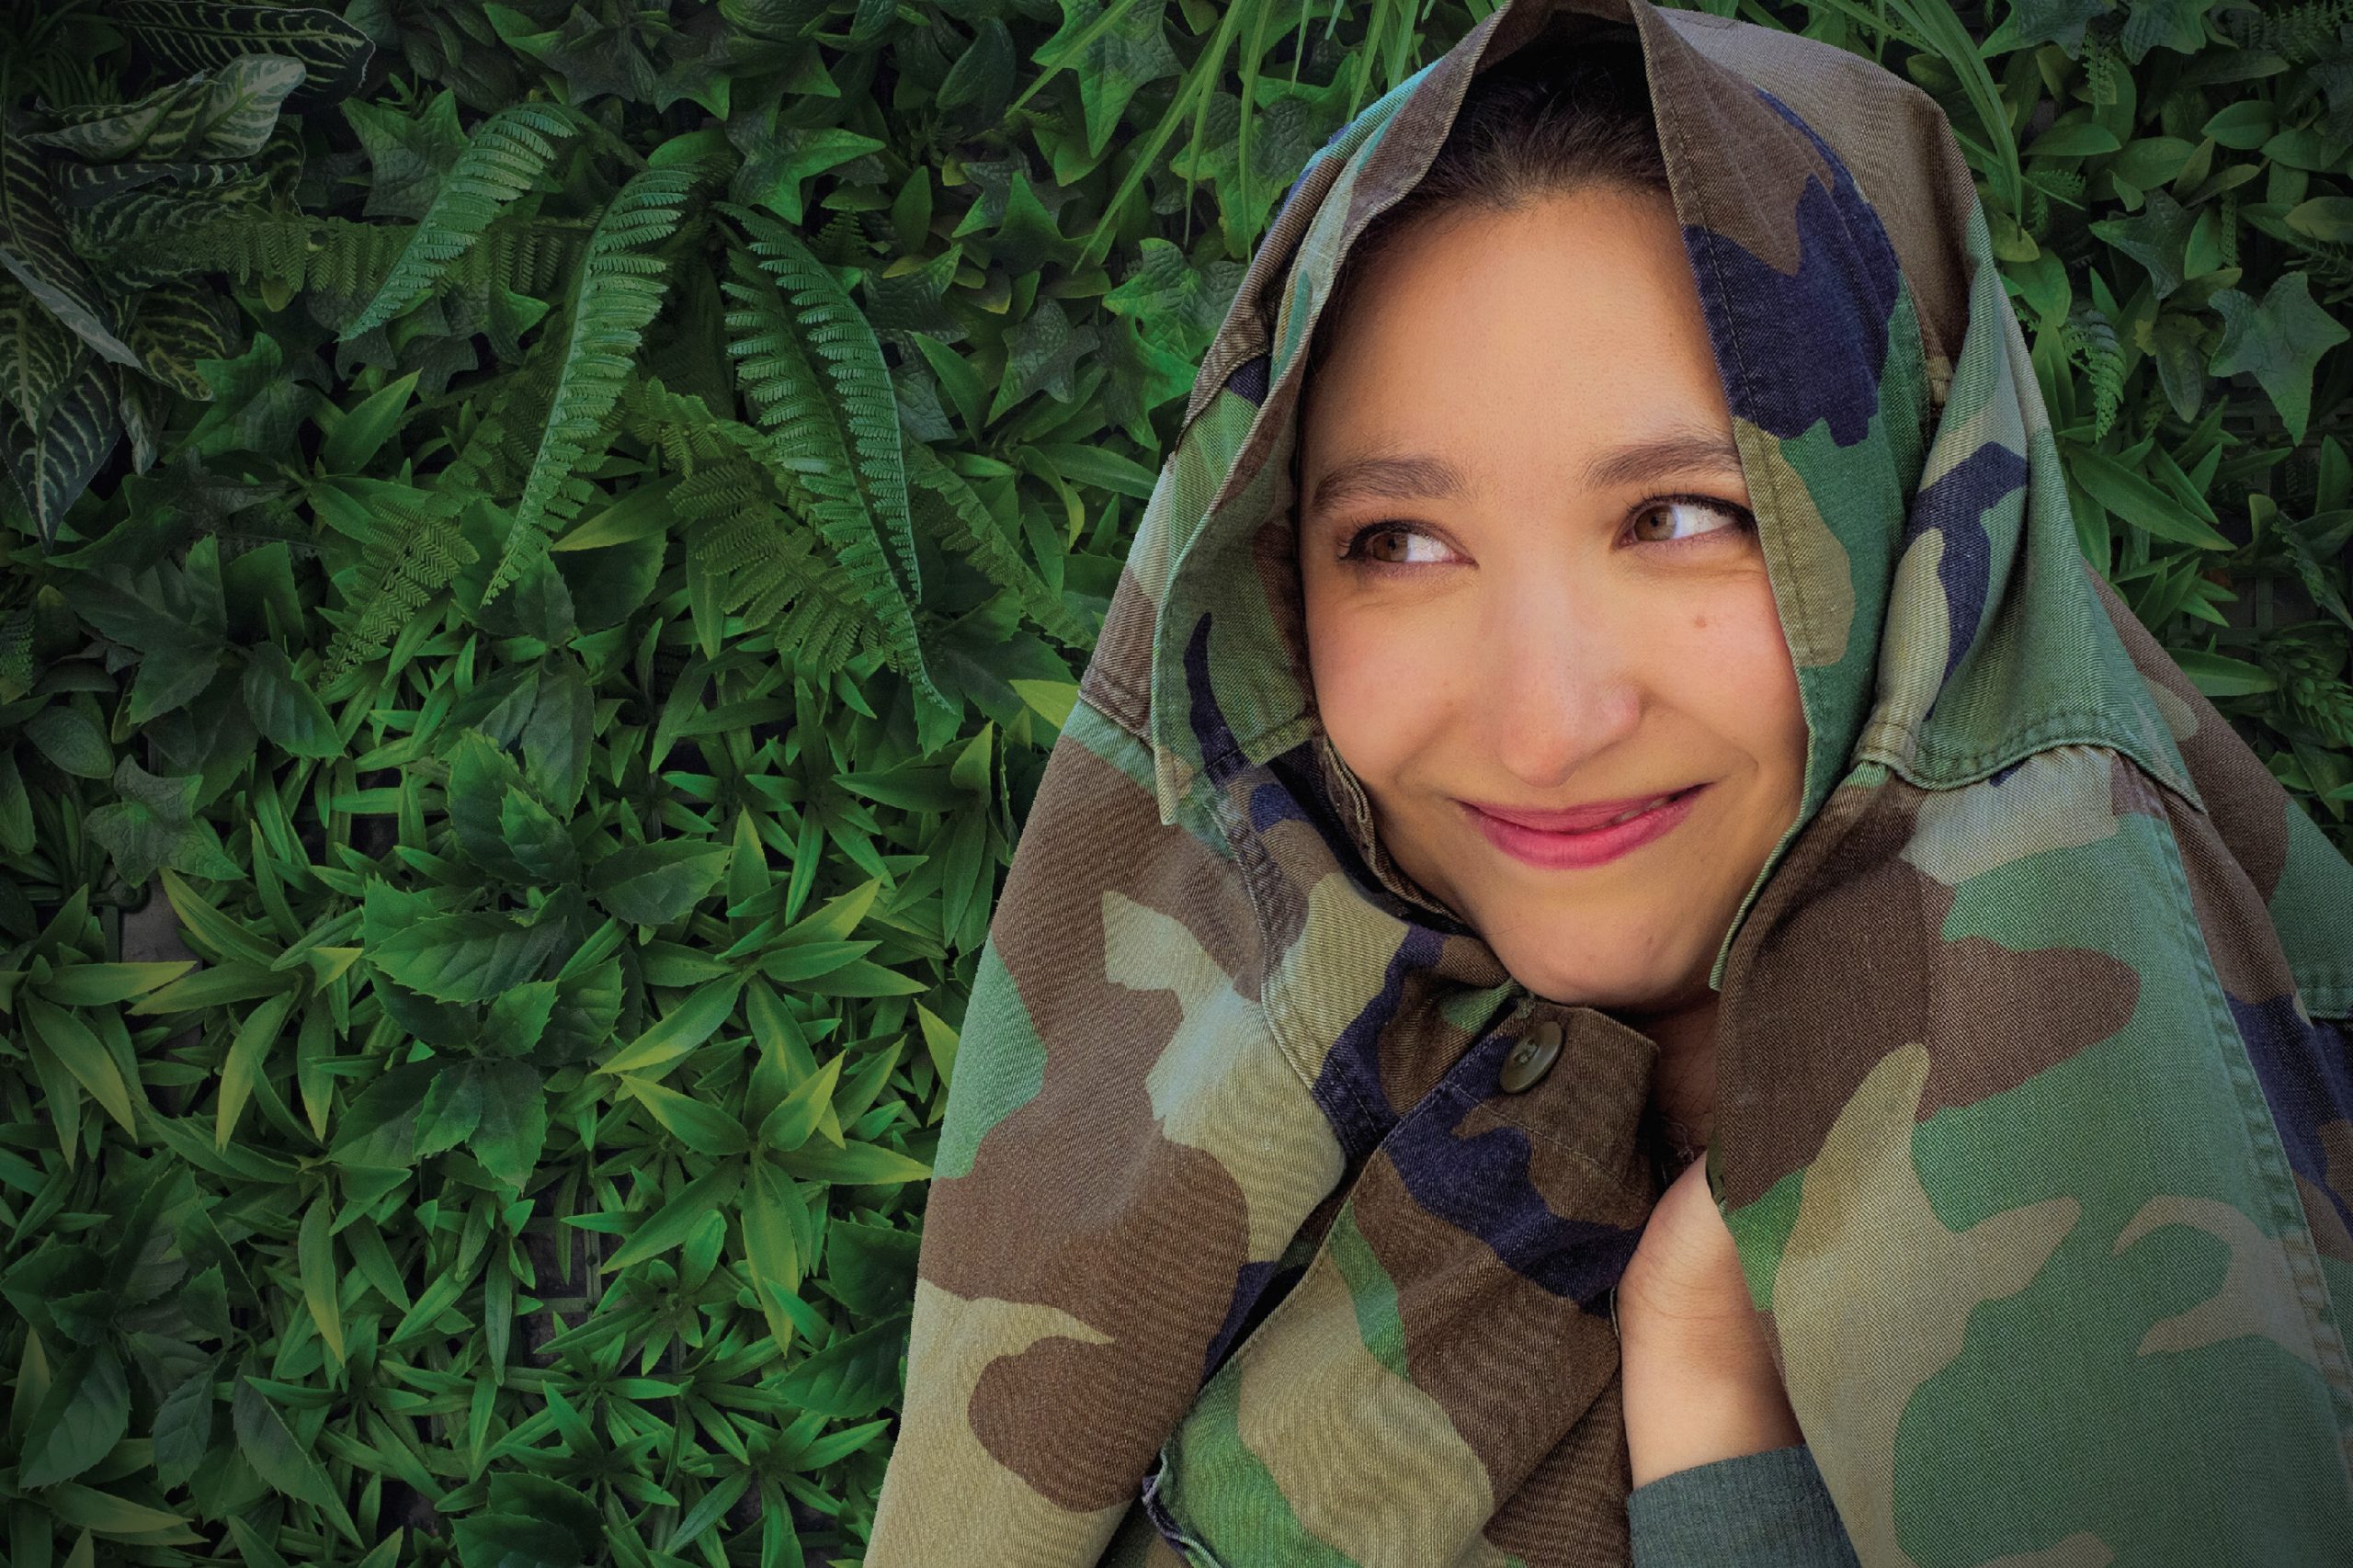 A young woman grins looking to one side in front of a push, and with a camoflage jacket over her head. Themes of the climate crisis.